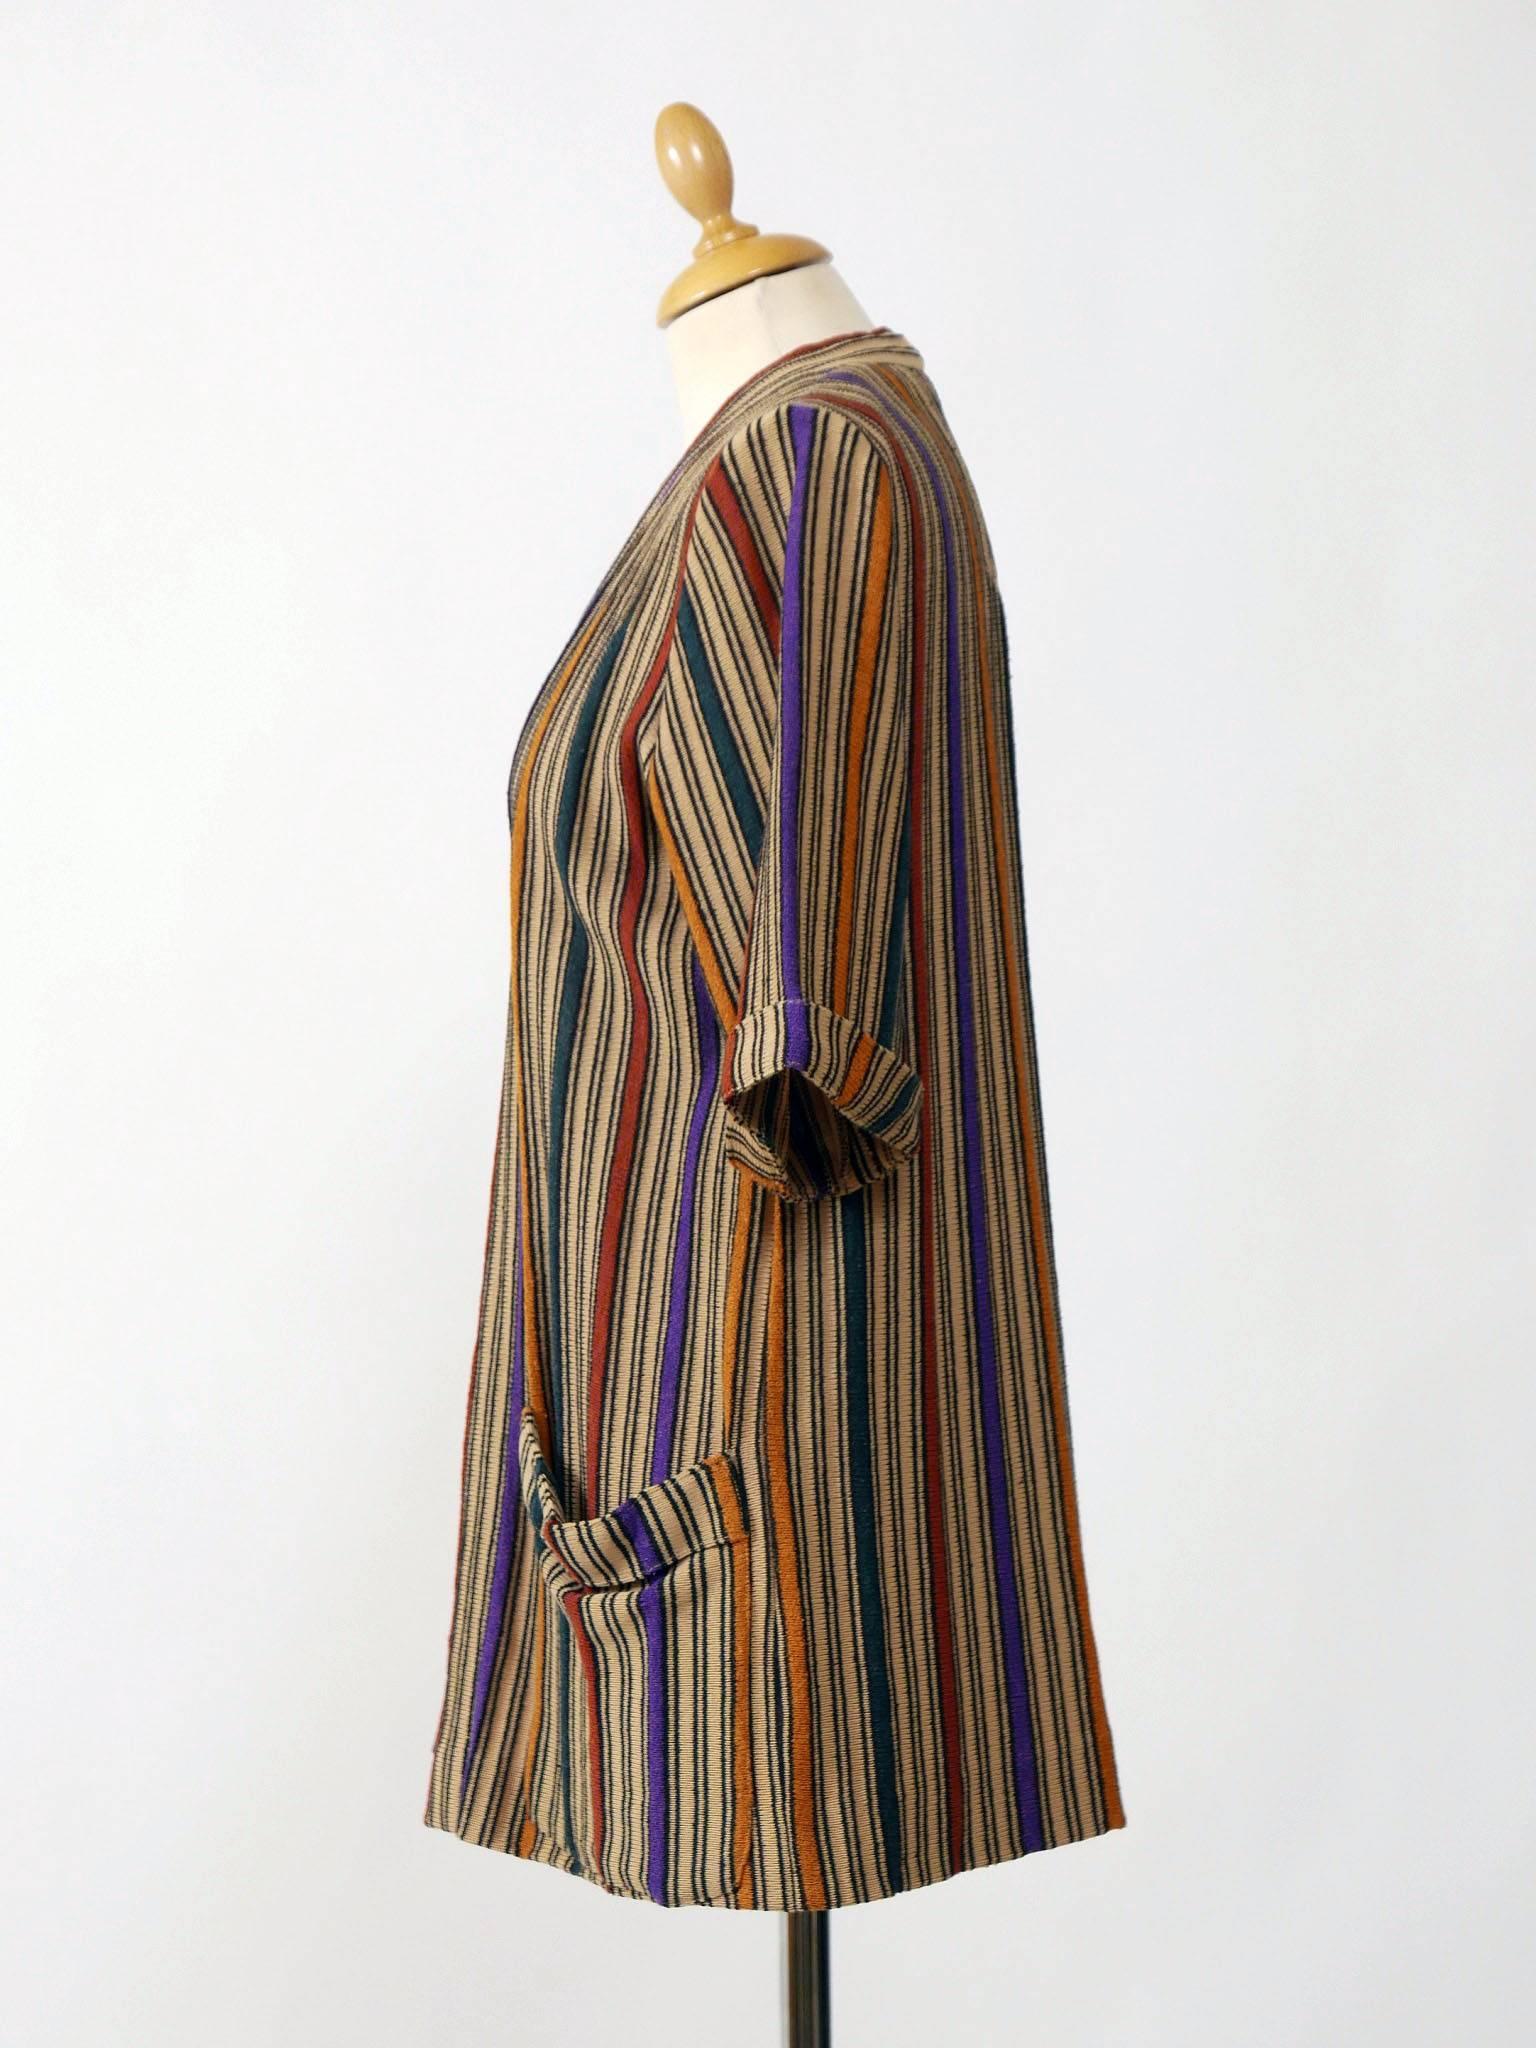 This lovely vintage 70s Missoni open cardigan is in a silk knit with classic Missoni style colorful print. It has pockets and short sleeves. 

Missoni is a high-end Italian fashion house based in Varese, and known for its colorful knitwear